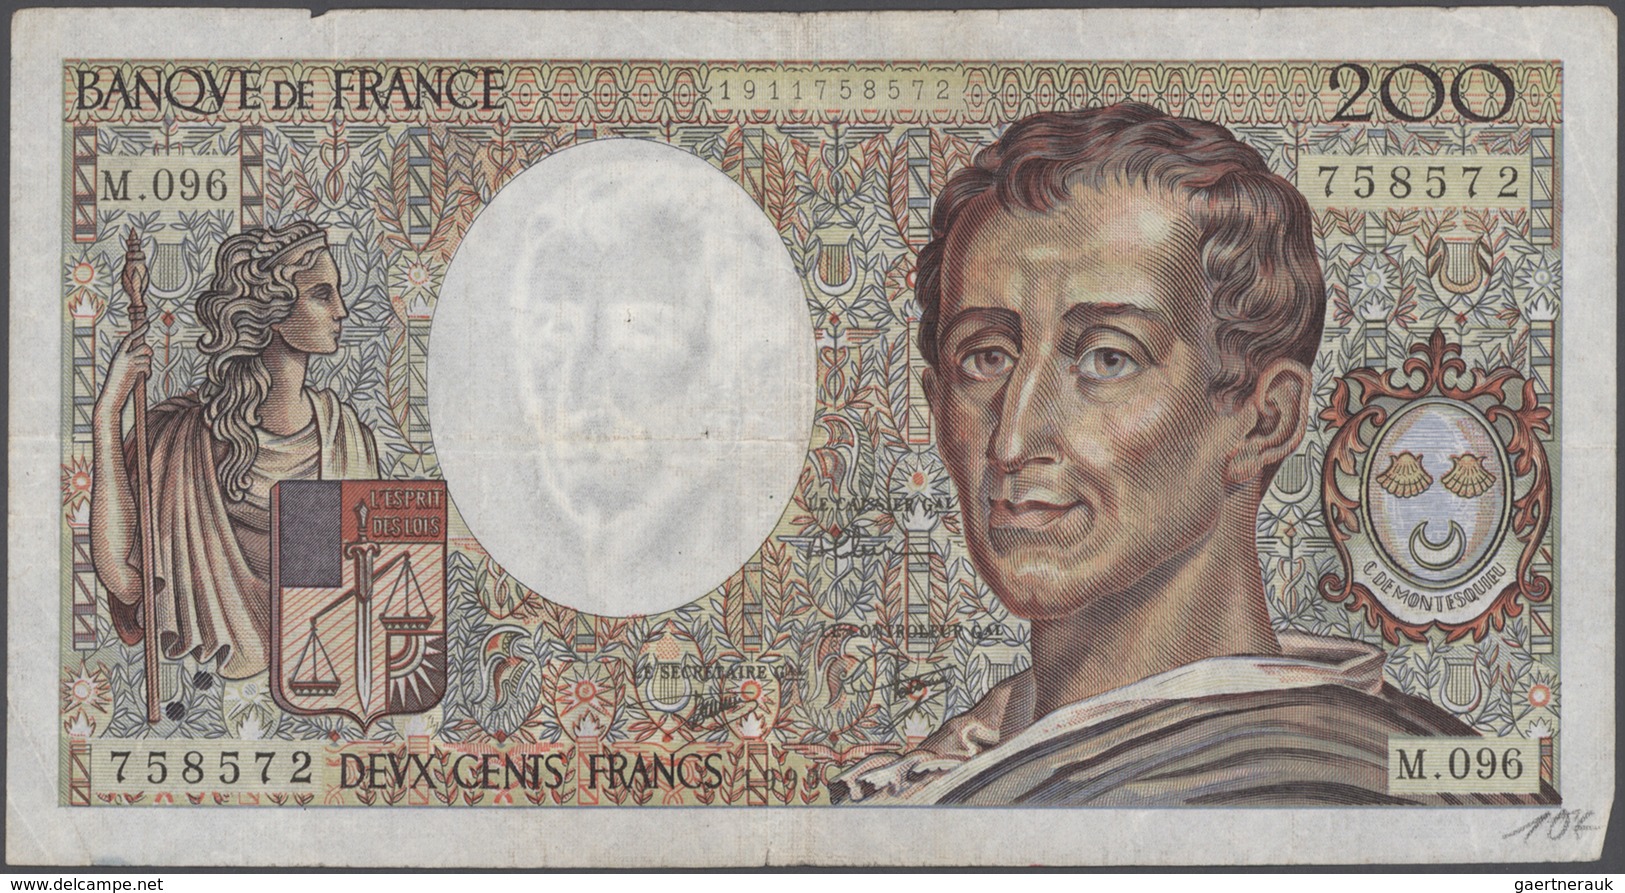 Alle Welt: Collectors album with more than 340 banknotes France, Greece, French Indochina, French We